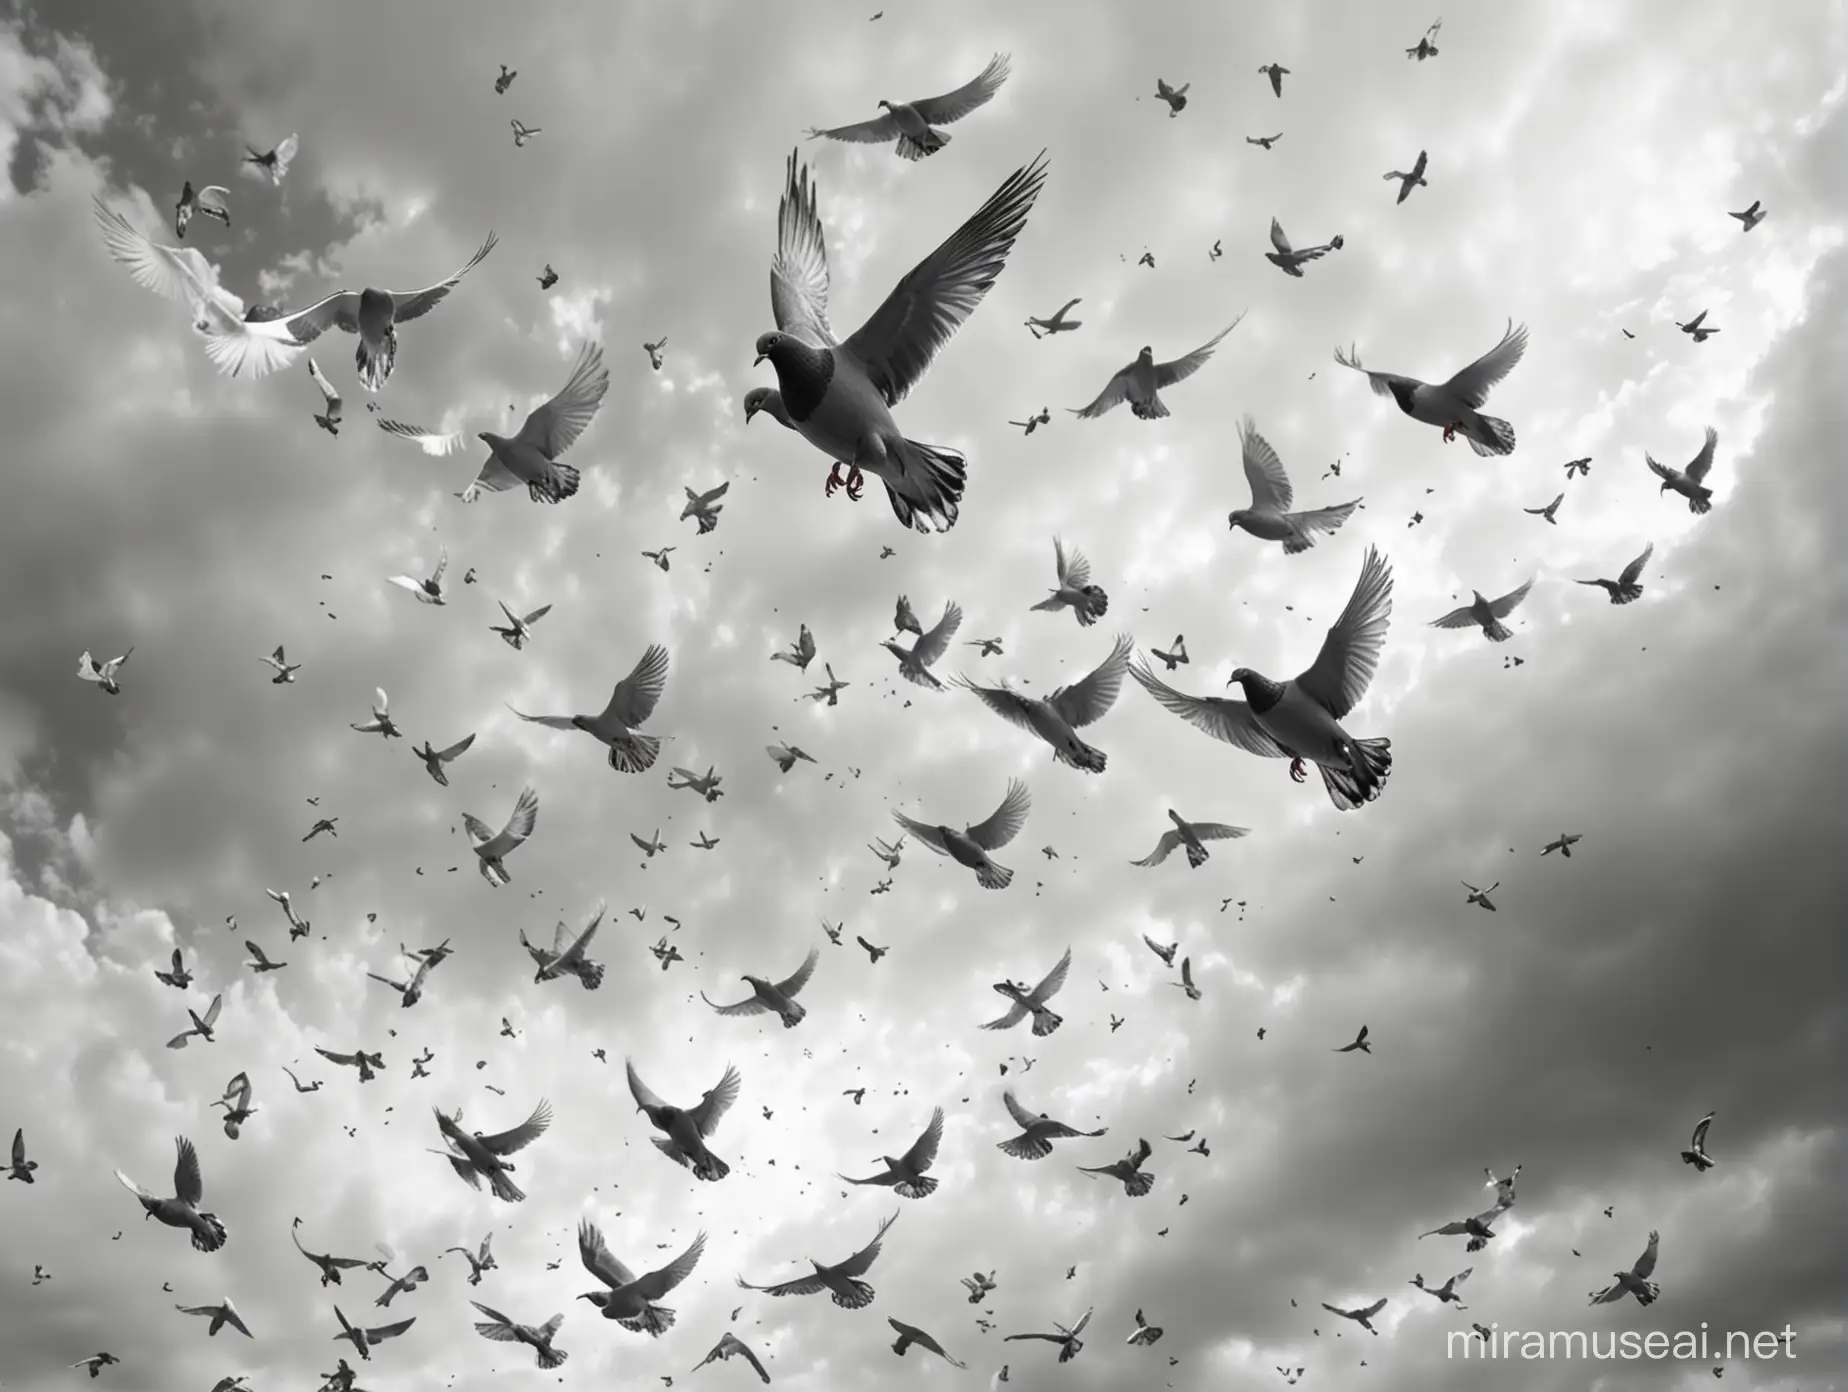 Colorful Flying Pigeons Against Monochrome Sky Photorealistic Urban Birdwatching Scene